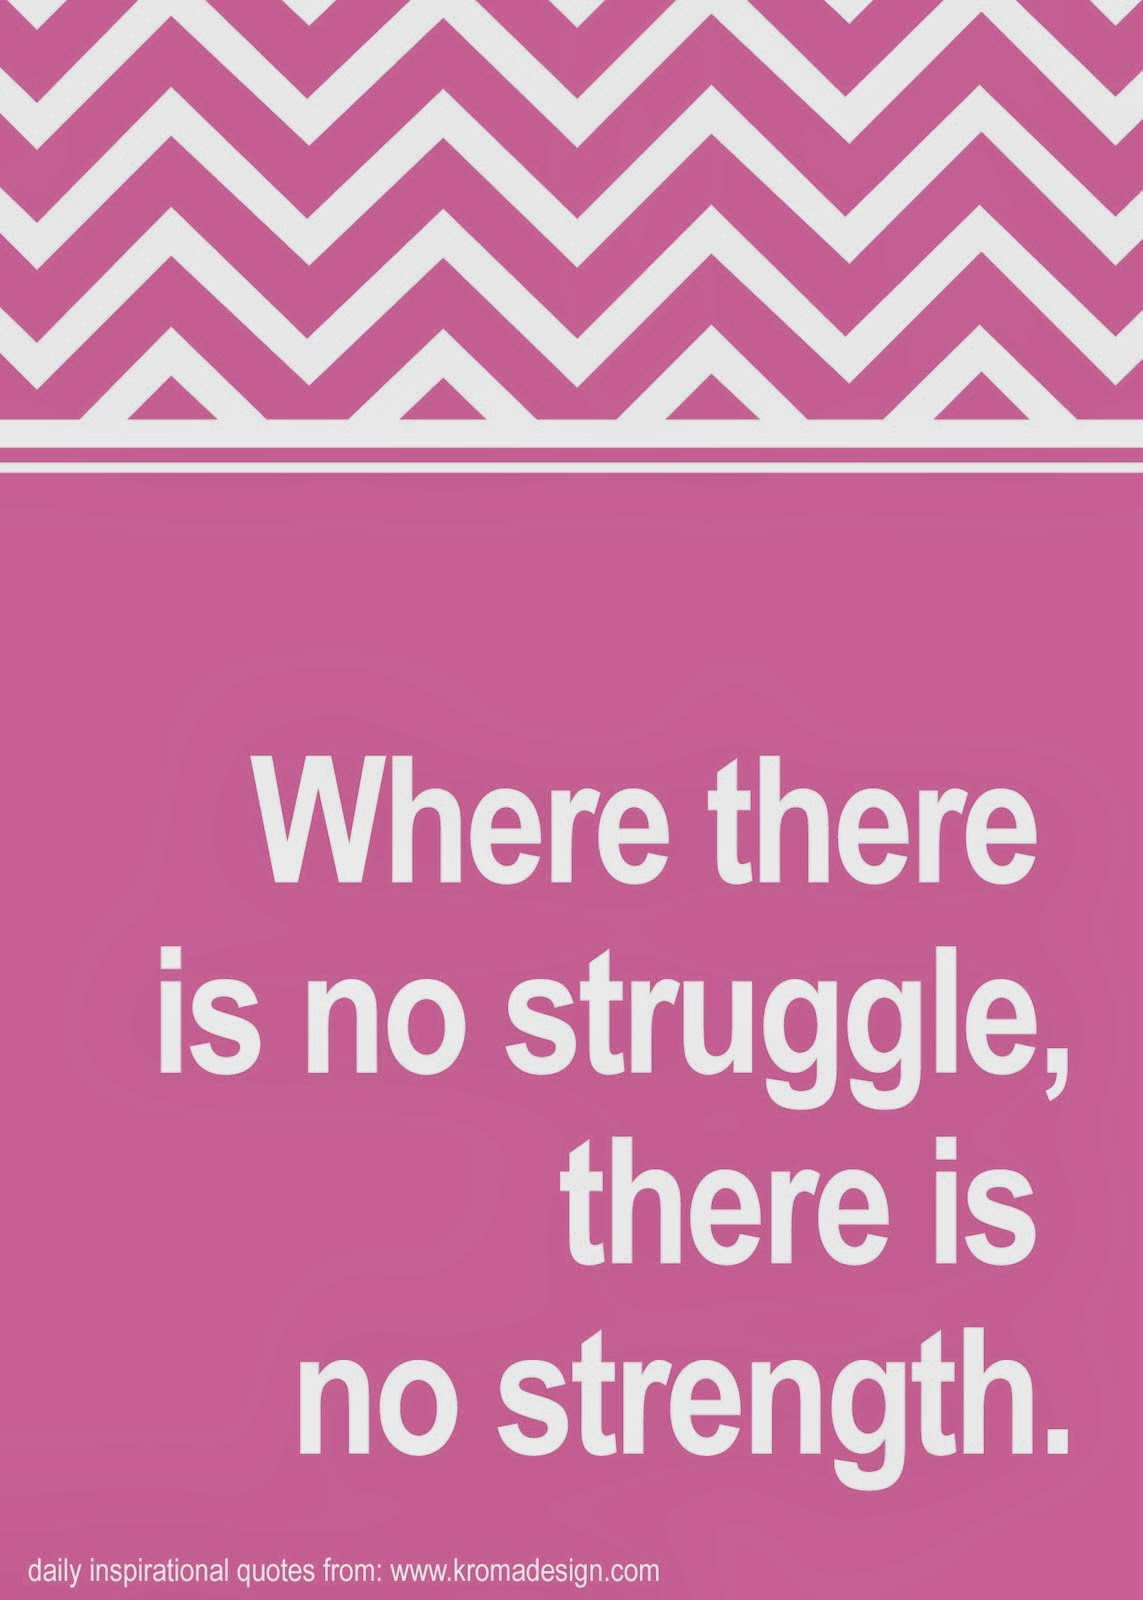 where-there-is-no-strugglethere-is-no-strength-inspirational-quote.jpg